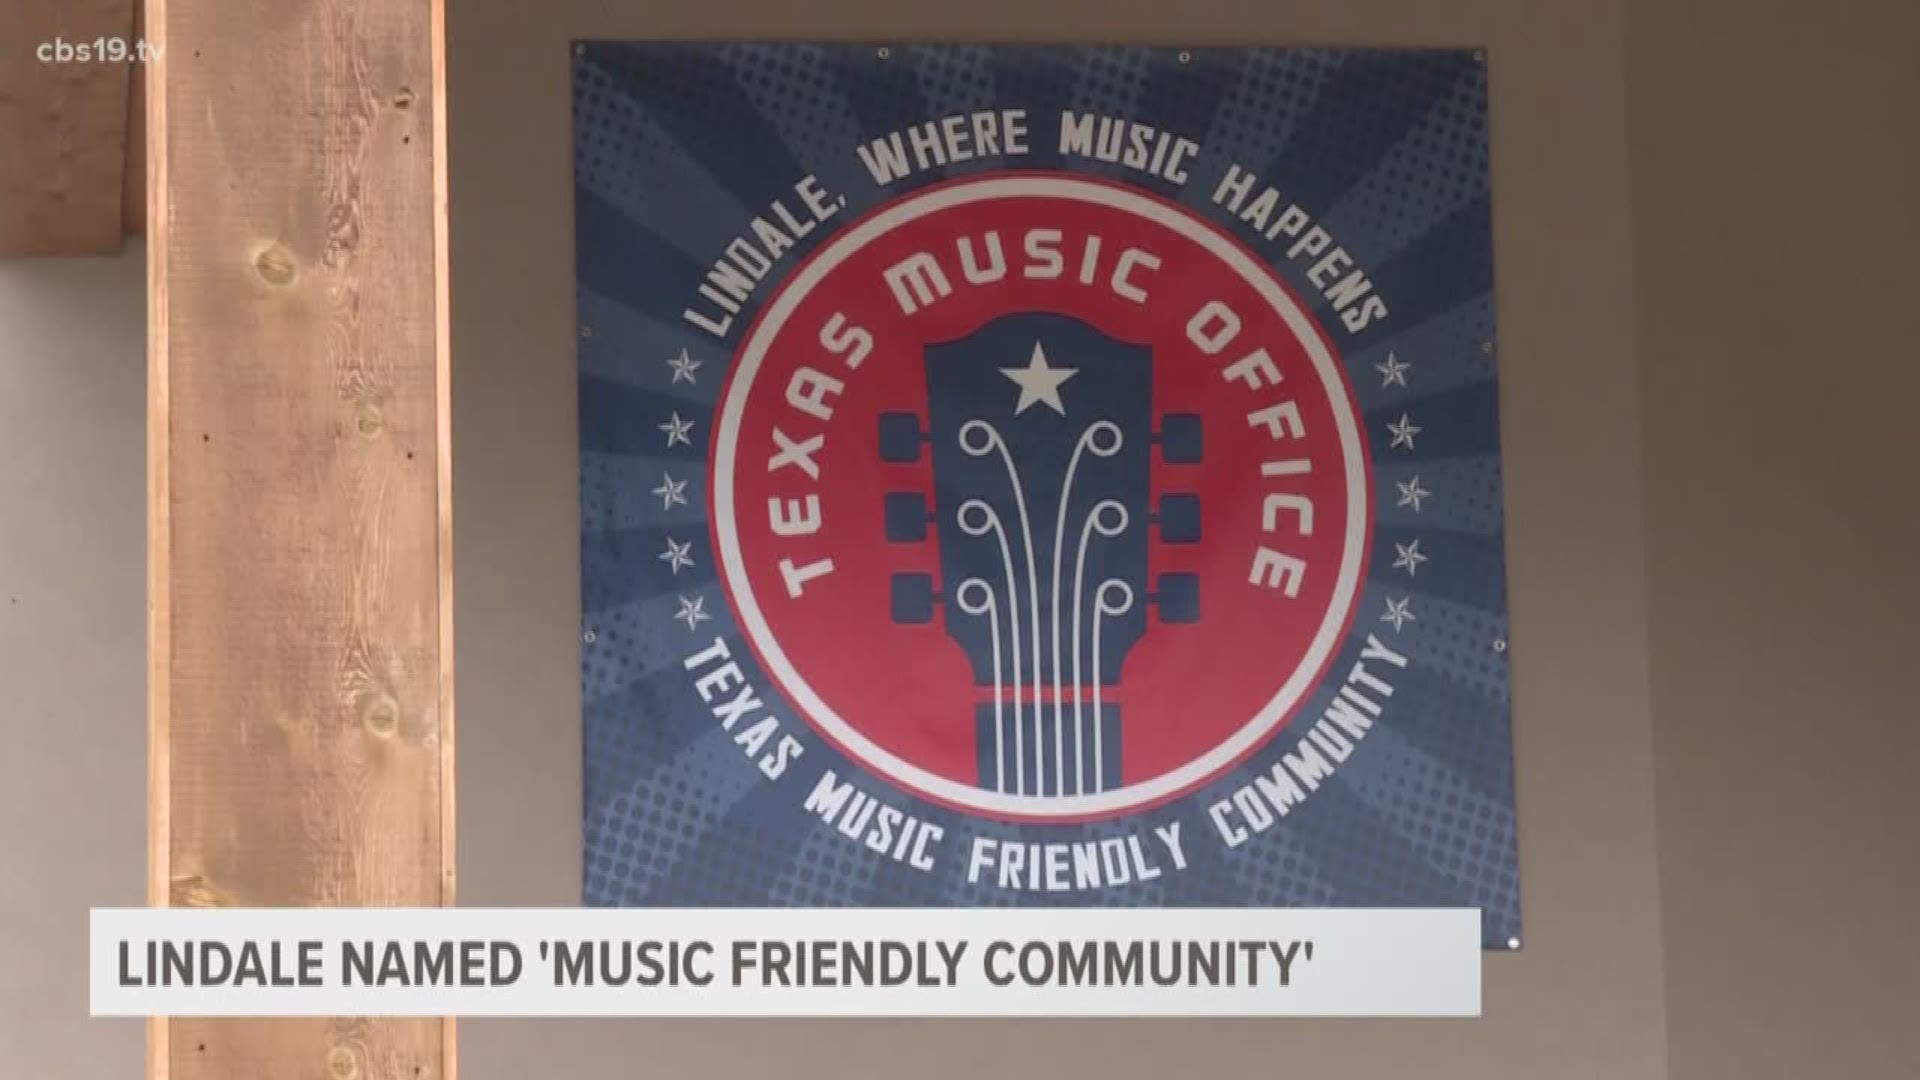 Lindale became one of the five cities in Texas to be designated as a "Music Friendly Community."